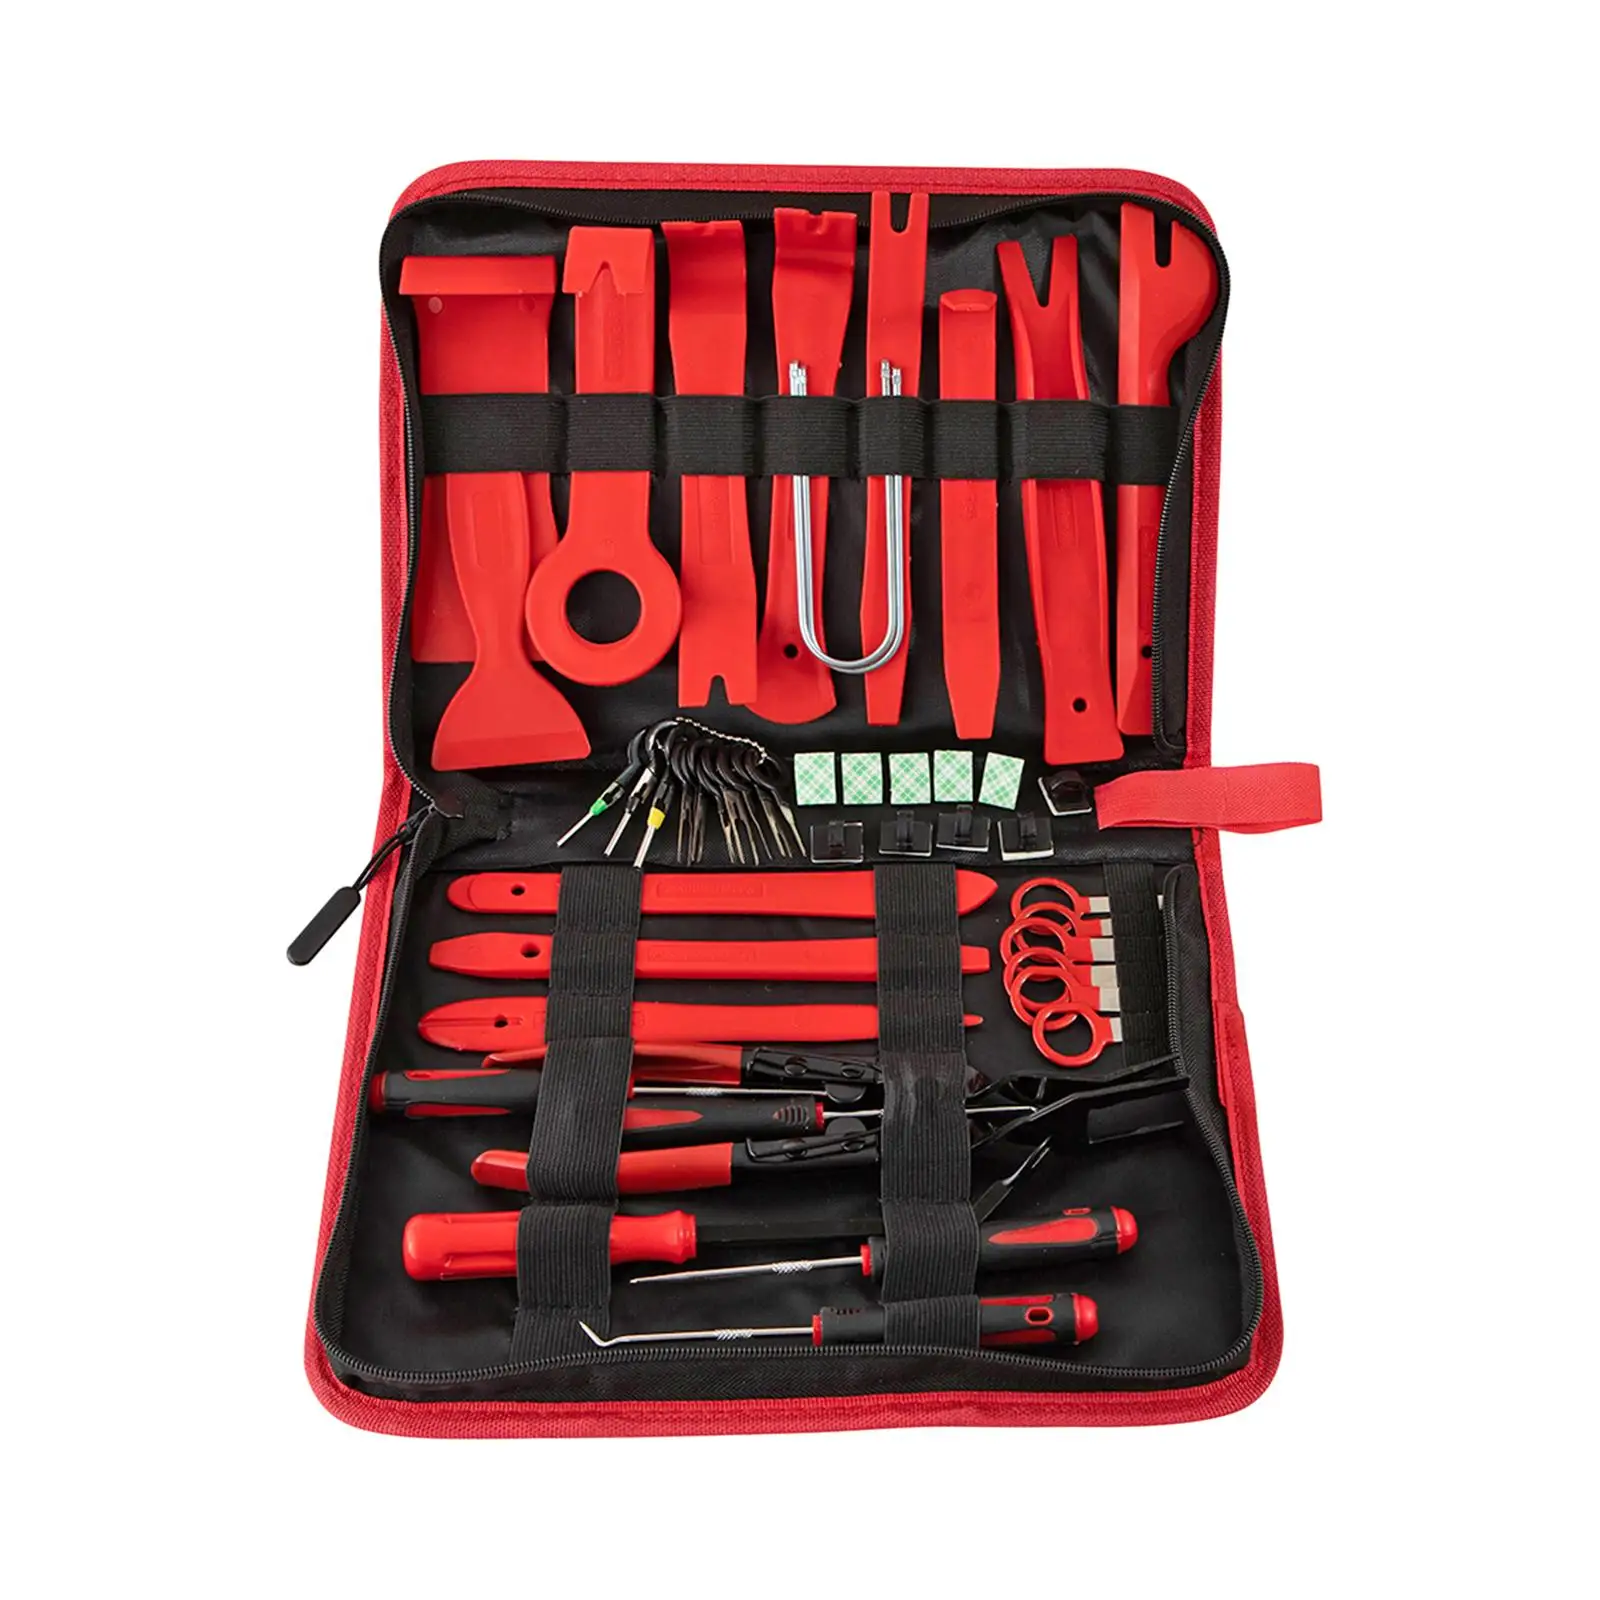 Trim Removal Tool Car Upholstery Repair Kit Precision Hook and Pick Set Portable Auto Clip Pliers Versatile Sturdy